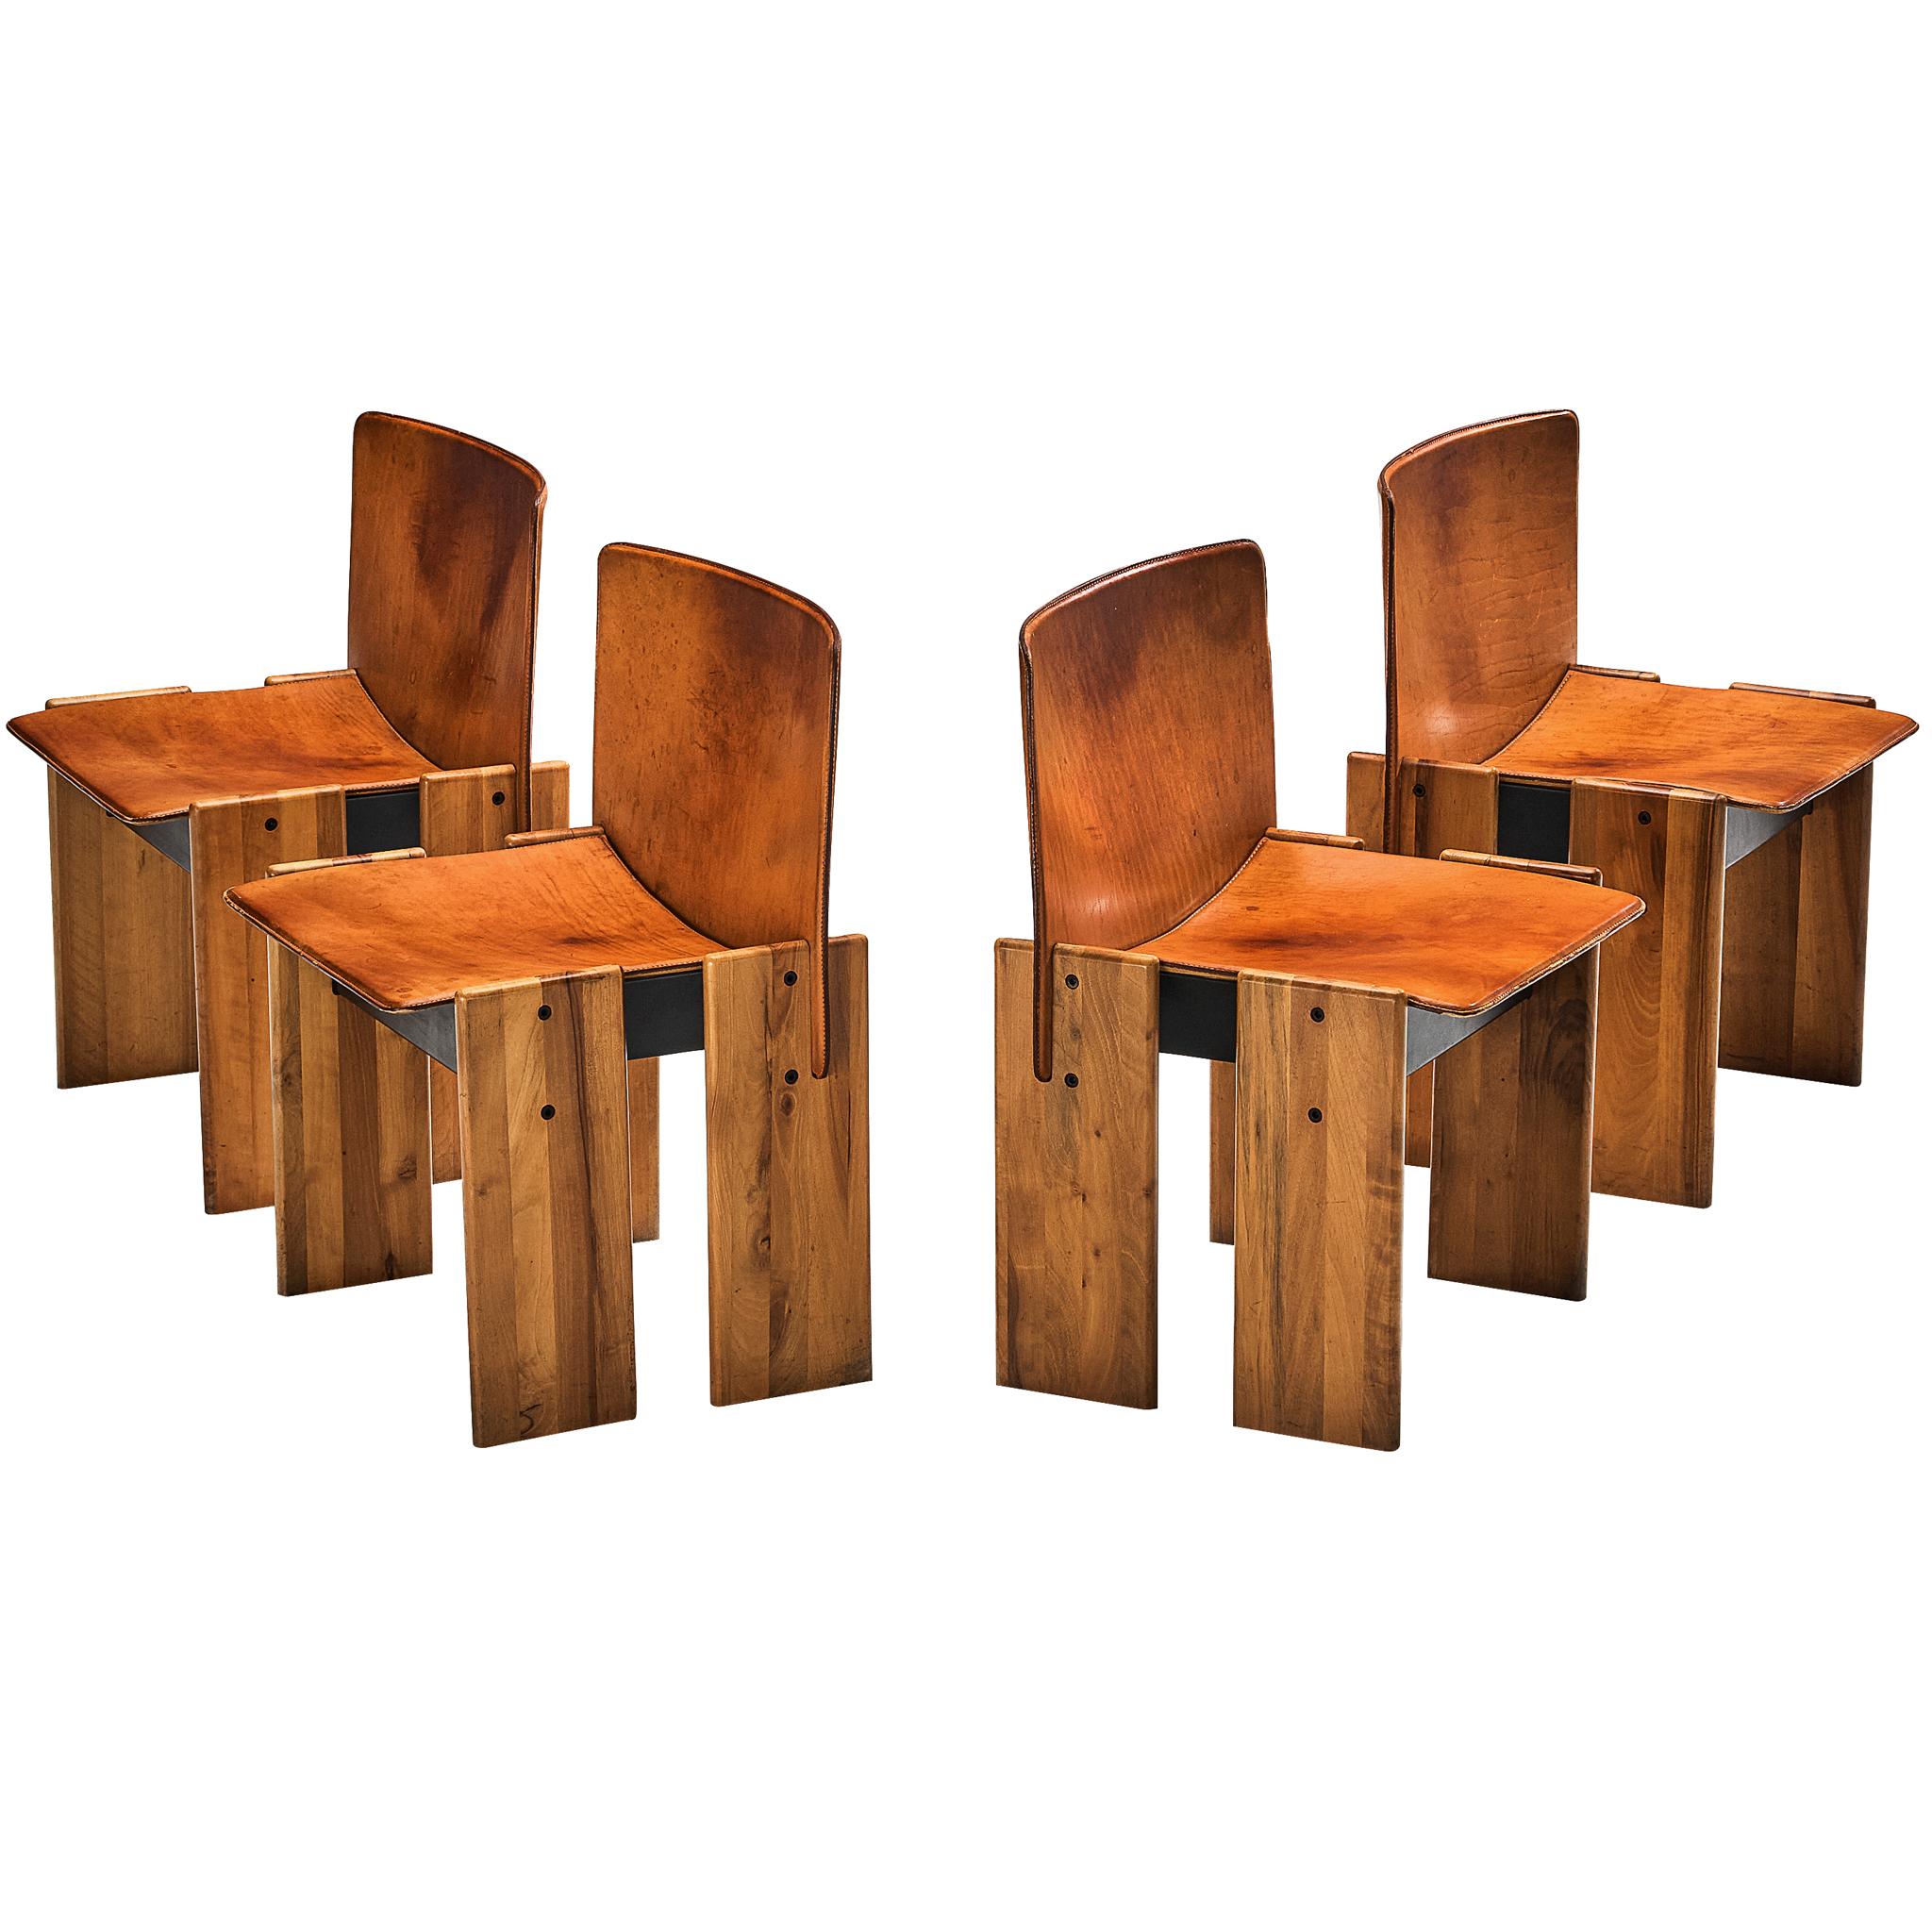 Barsacchi & Vegni Set of Four 'Avila' Dining Chairs in Walnut and Leather 